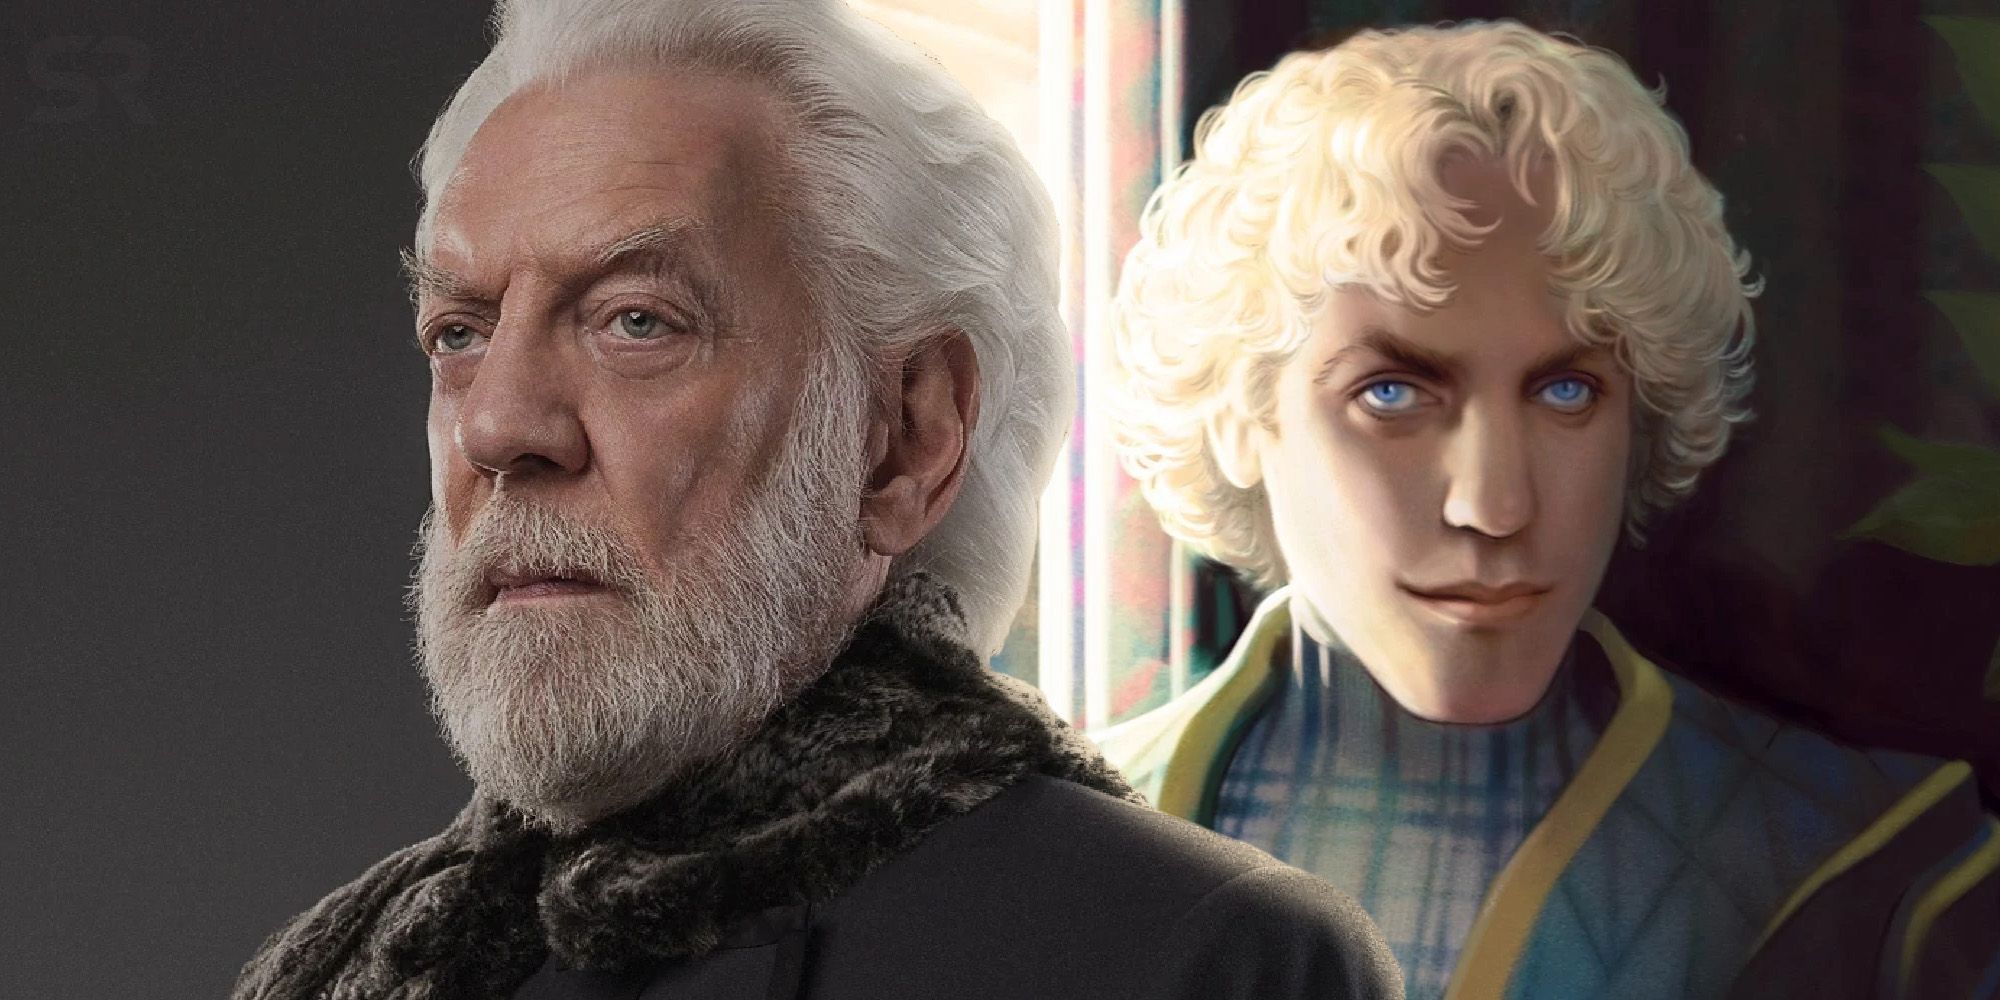 An image of President Snow from The Hunger Games movies and art of a young Coriolanus Snow in the background. 